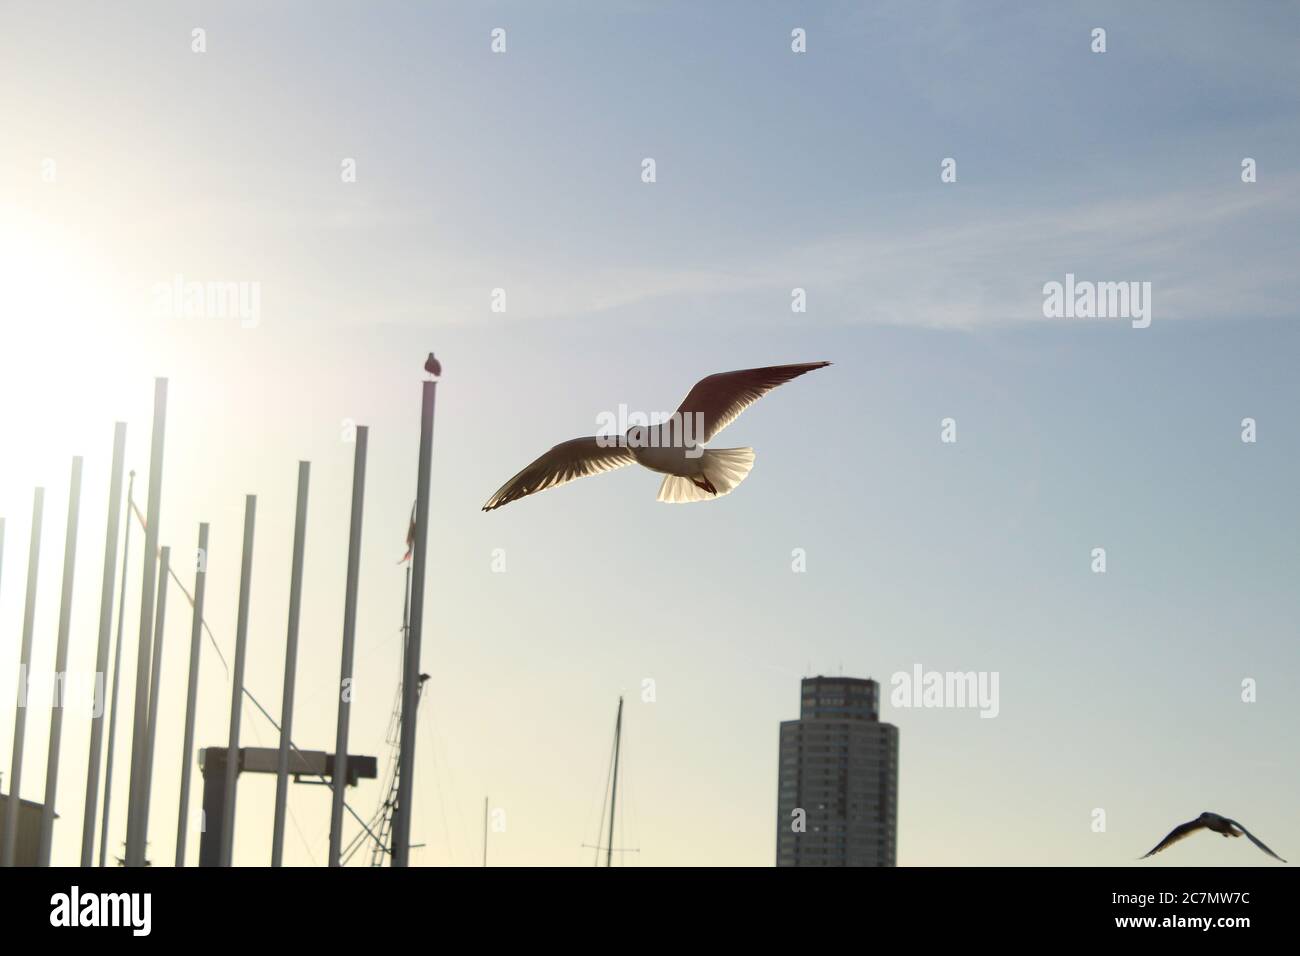 Black-headed gull (Lachmöwe) flying in the harbour of Schleswig with the Wikingturm ('Viking Tower') in the backgroud, Schleswig, S-H, Germany. Stock Photo